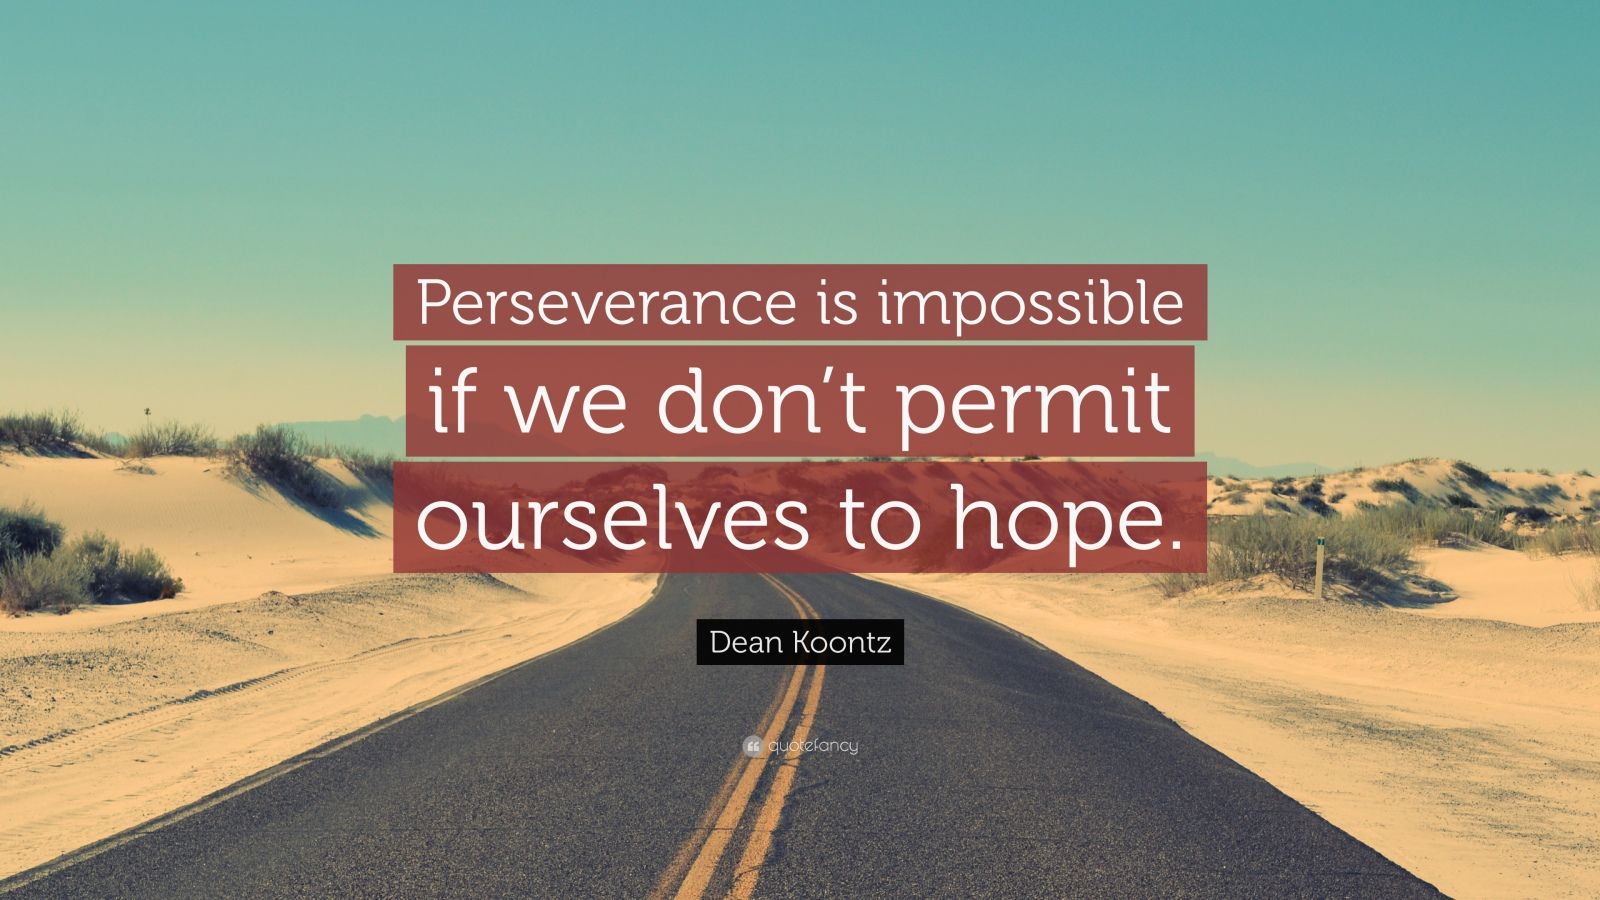 Dean Koontz Quote: “Perseverance is impossible if we don’t permit ...